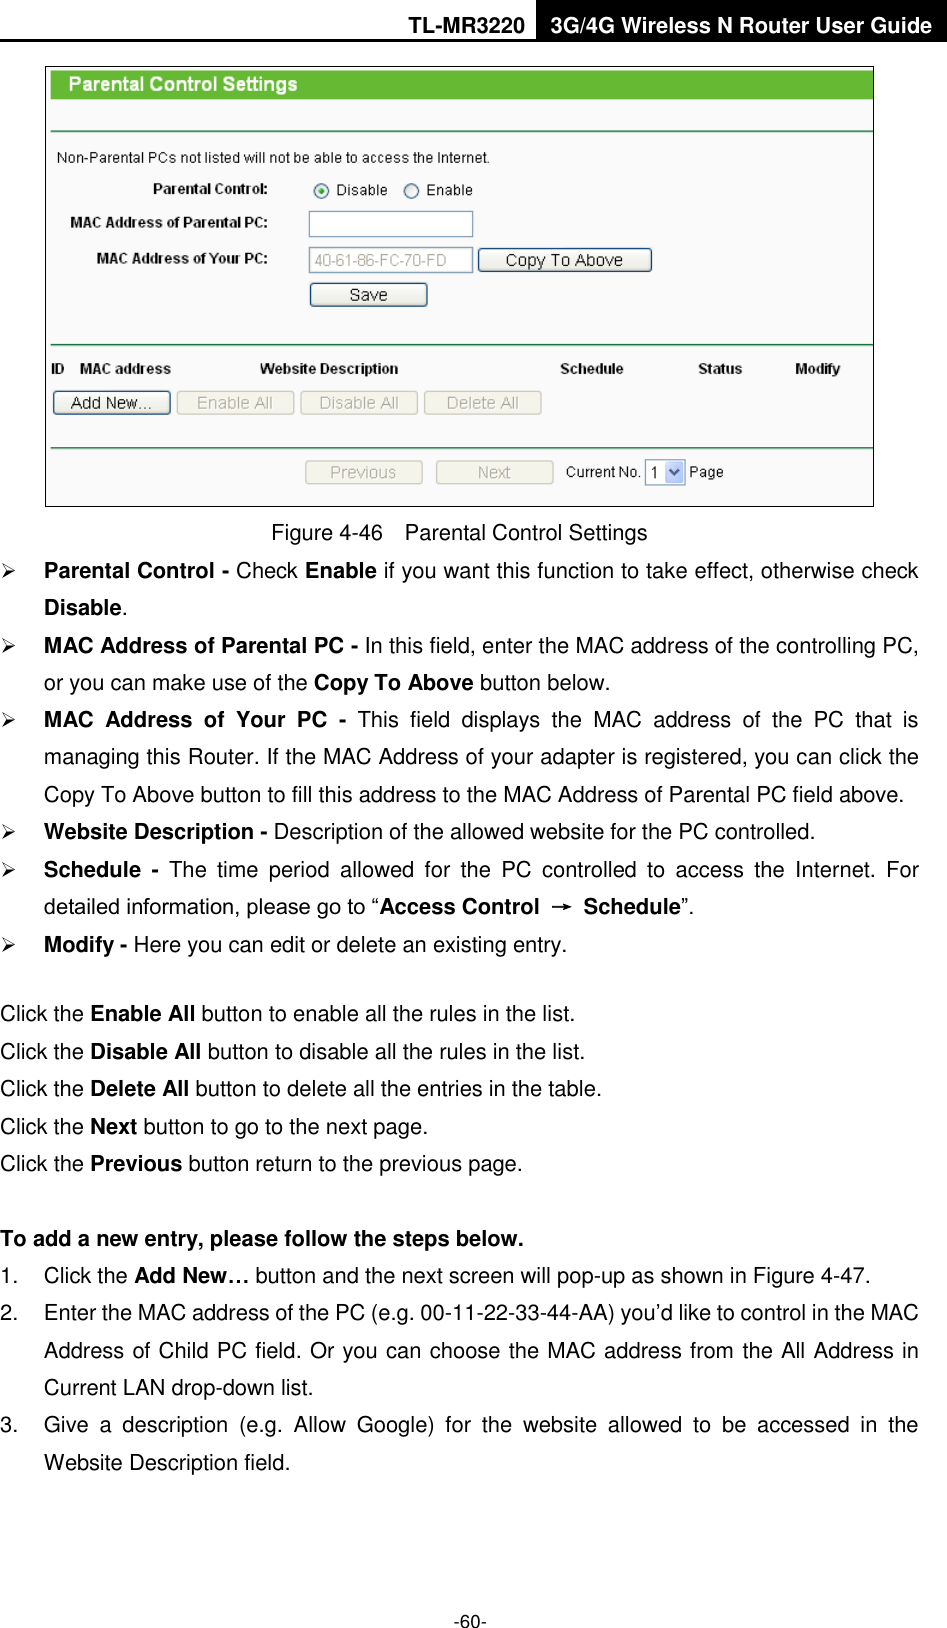 TL-MR3220 3G/4G Wireless N Router User Guide  -60-  Figure 4-46  Parental Control Settings  Parental Control - Check Enable if you want this function to take effect, otherwise check Disable.    MAC Address of Parental PC - In this field, enter the MAC address of the controlling PC, or you can make use of the Copy To Above button below.    MAC  Address  of  Your  PC  -  This  field  displays  the  MAC  address  of  the  PC  that  is managing this Router. If the MAC Address of your adapter is registered, you can click the Copy To Above button to fill this address to the MAC Address of Parental PC field above.    Website Description - Description of the allowed website for the PC controlled.    Schedule -  The  time  period  allowed  for  the  PC  controlled  to  access  the  Internet.  For detailed information, please go to “Access Control  →  Schedule”.    Modify - Here you can edit or delete an existing entry.   Click the Enable All button to enable all the rules in the list. Click the Disable All button to disable all the rules in the list. Click the Delete All button to delete all the entries in the table. Click the Next button to go to the next page. Click the Previous button return to the previous page.  To add a new entry, please follow the steps below. 1.  Click the Add New… button and the next screen will pop-up as shown in Figure 4-47. 2.  Enter the MAC address of the PC (e.g. 00-11-22-33-44-AA) you’d like to control in the MAC Address of Child PC field. Or you can choose the MAC address from the All Address in Current LAN drop-down list. 3.  Give  a  description  (e.g.  Allow  Google)  for  the  website  allowed  to  be  accessed  in  the Website Description field. 